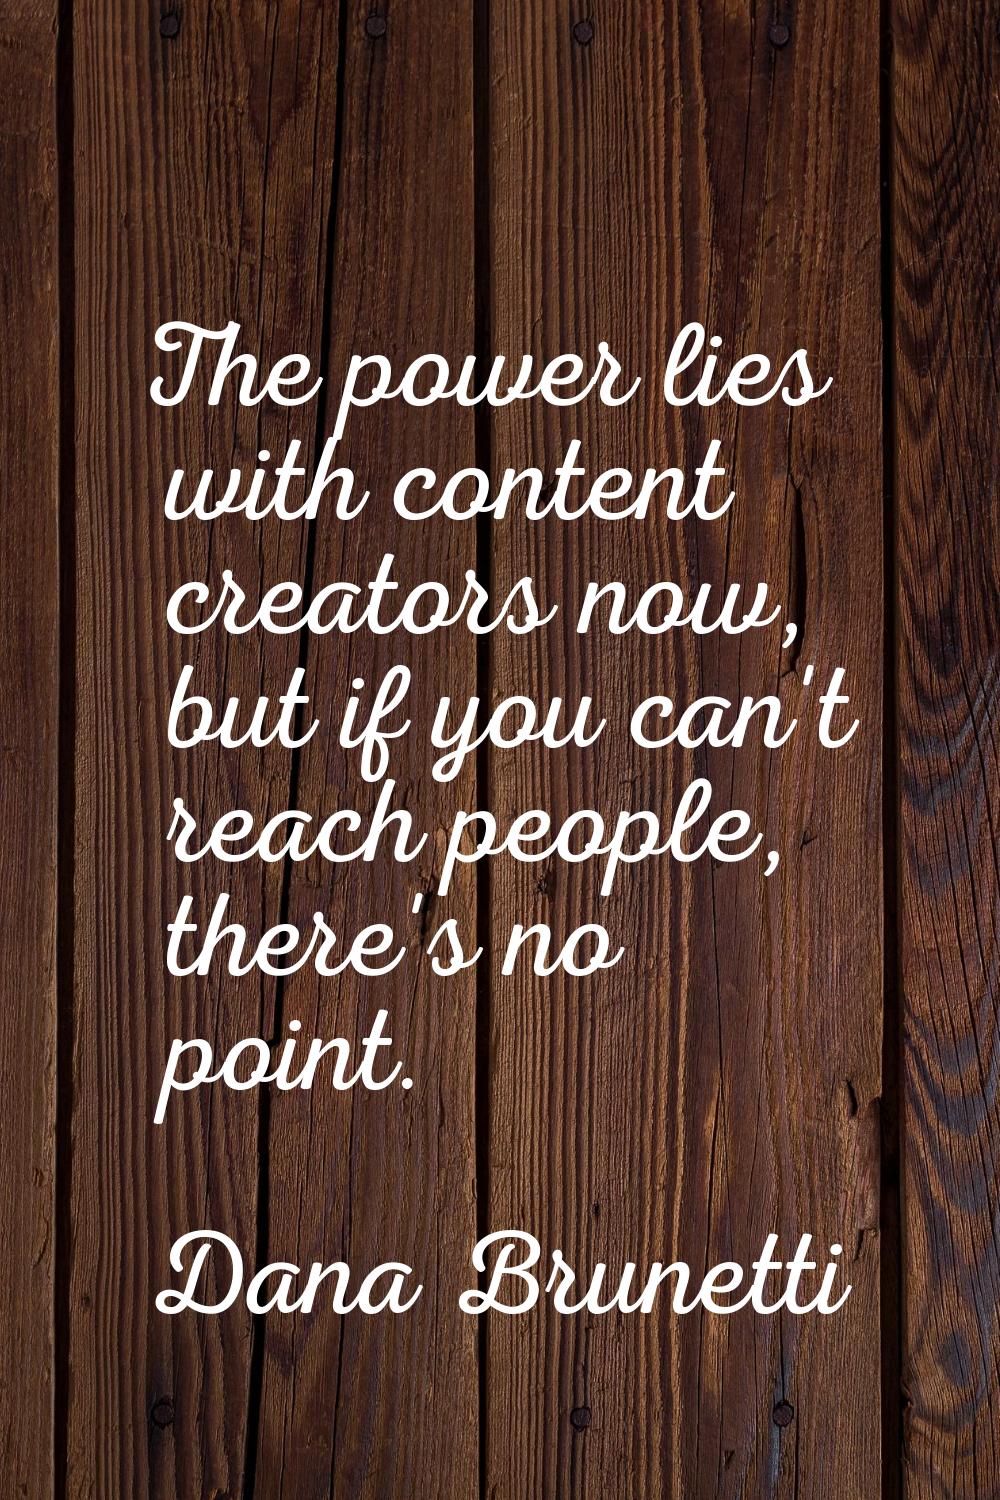 The power lies with content creators now, but if you can't reach people, there's no point.